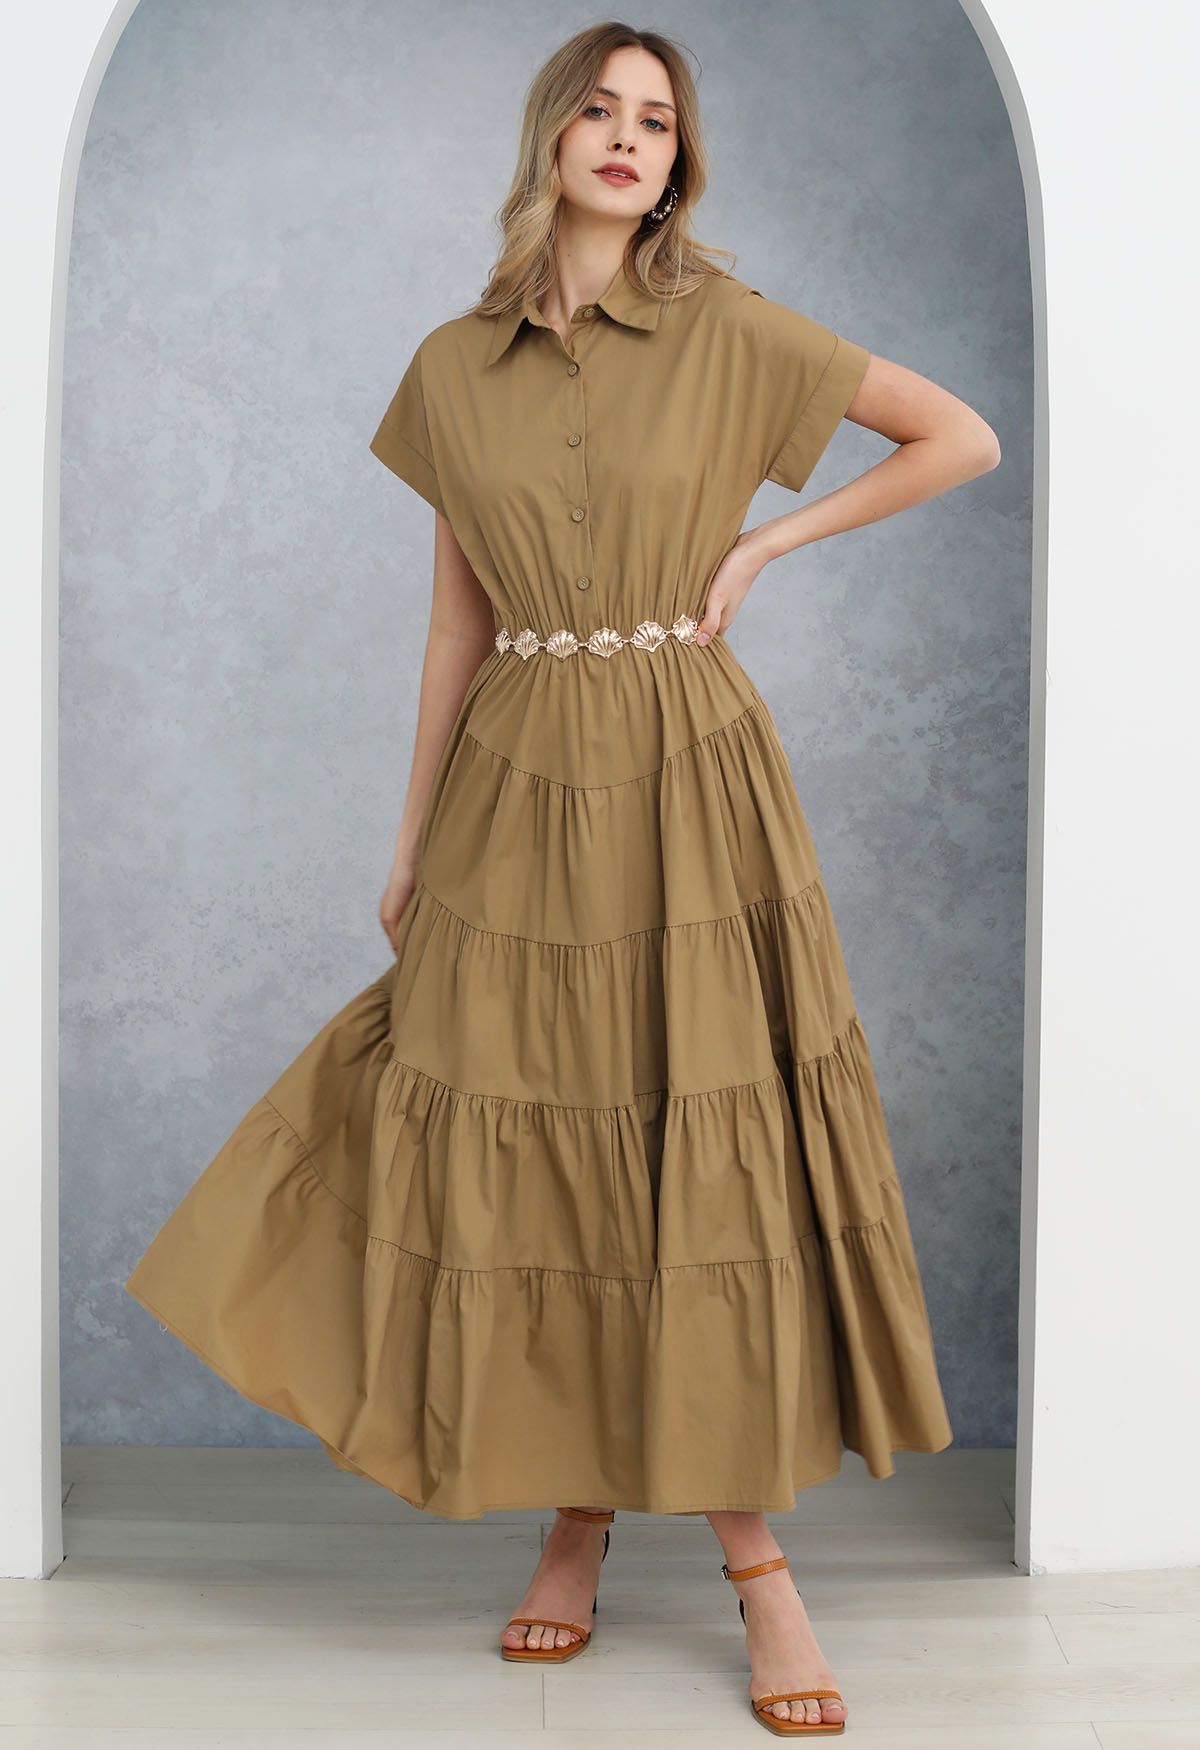 Short Sleeves Frilling Cotton Maxi Dress in Camel